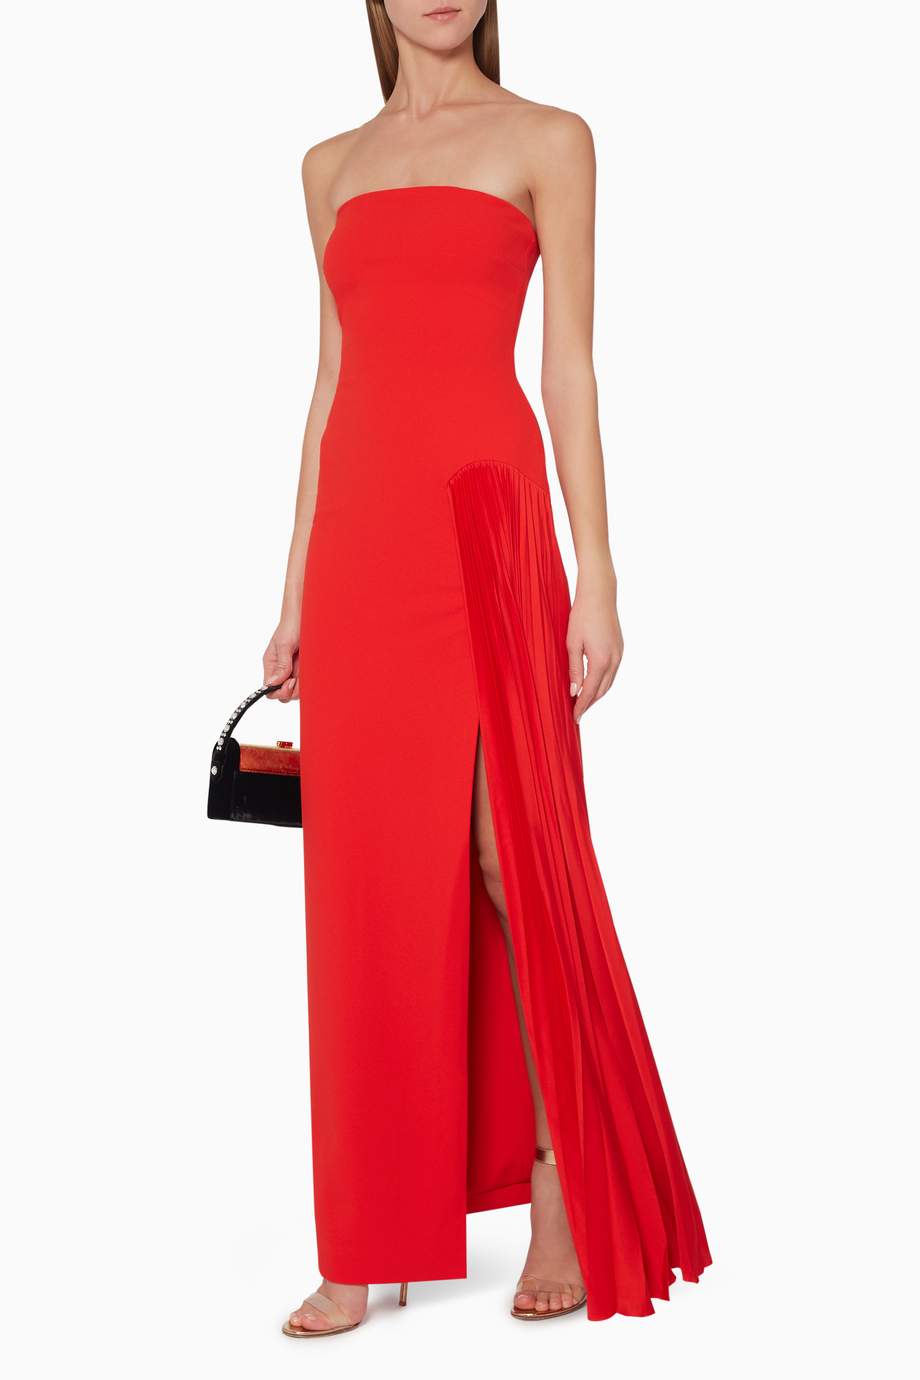 Shop Solace London Red Dolly Maxi Dress for Women | Ounass UAE